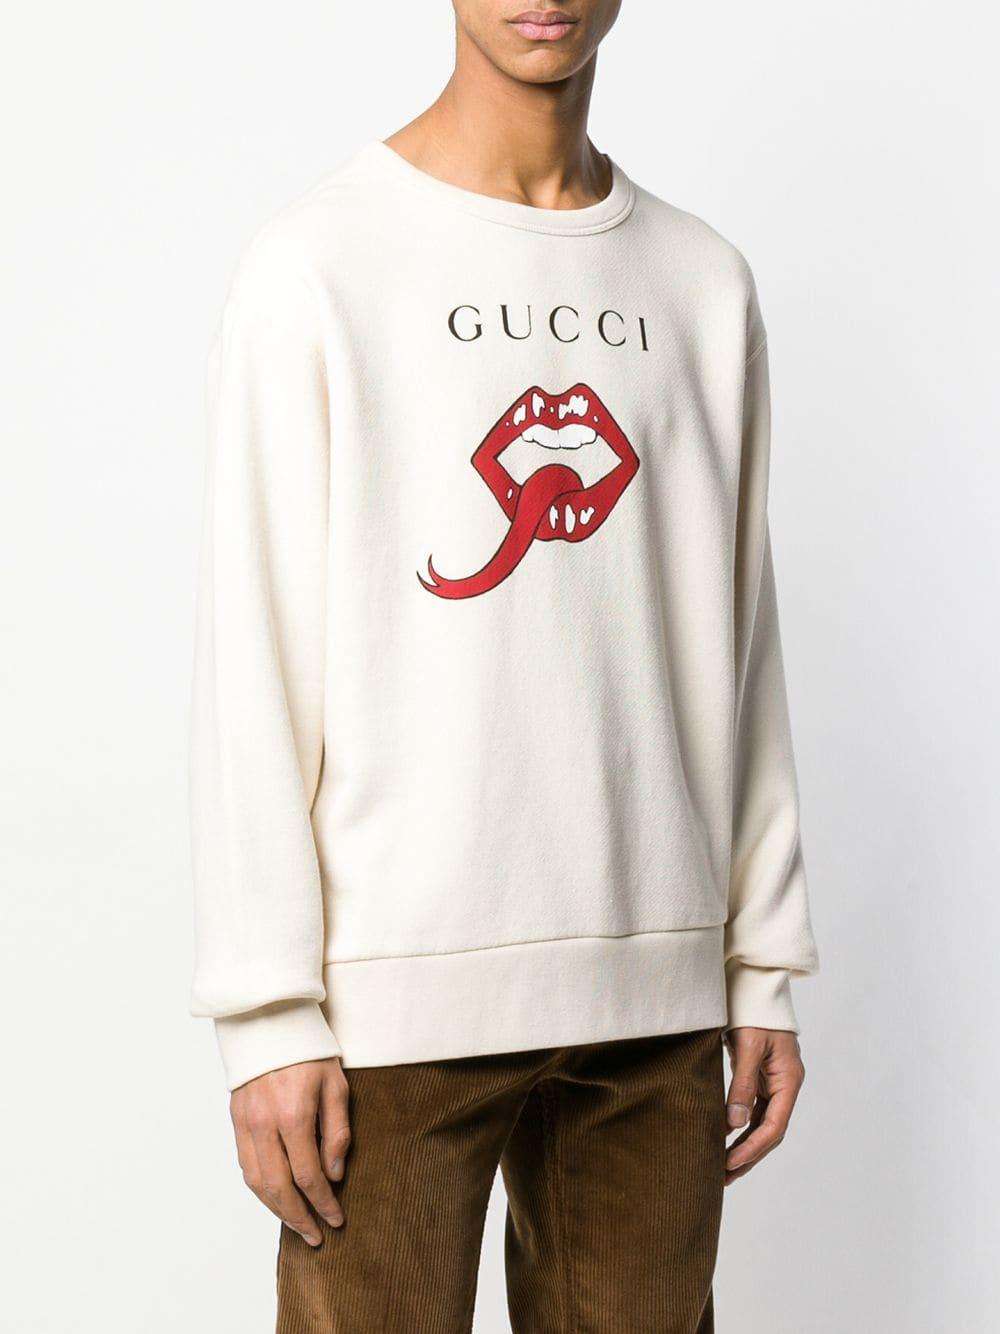 Gucci Mouth Print Sweatshirt in White for Men | Lyst